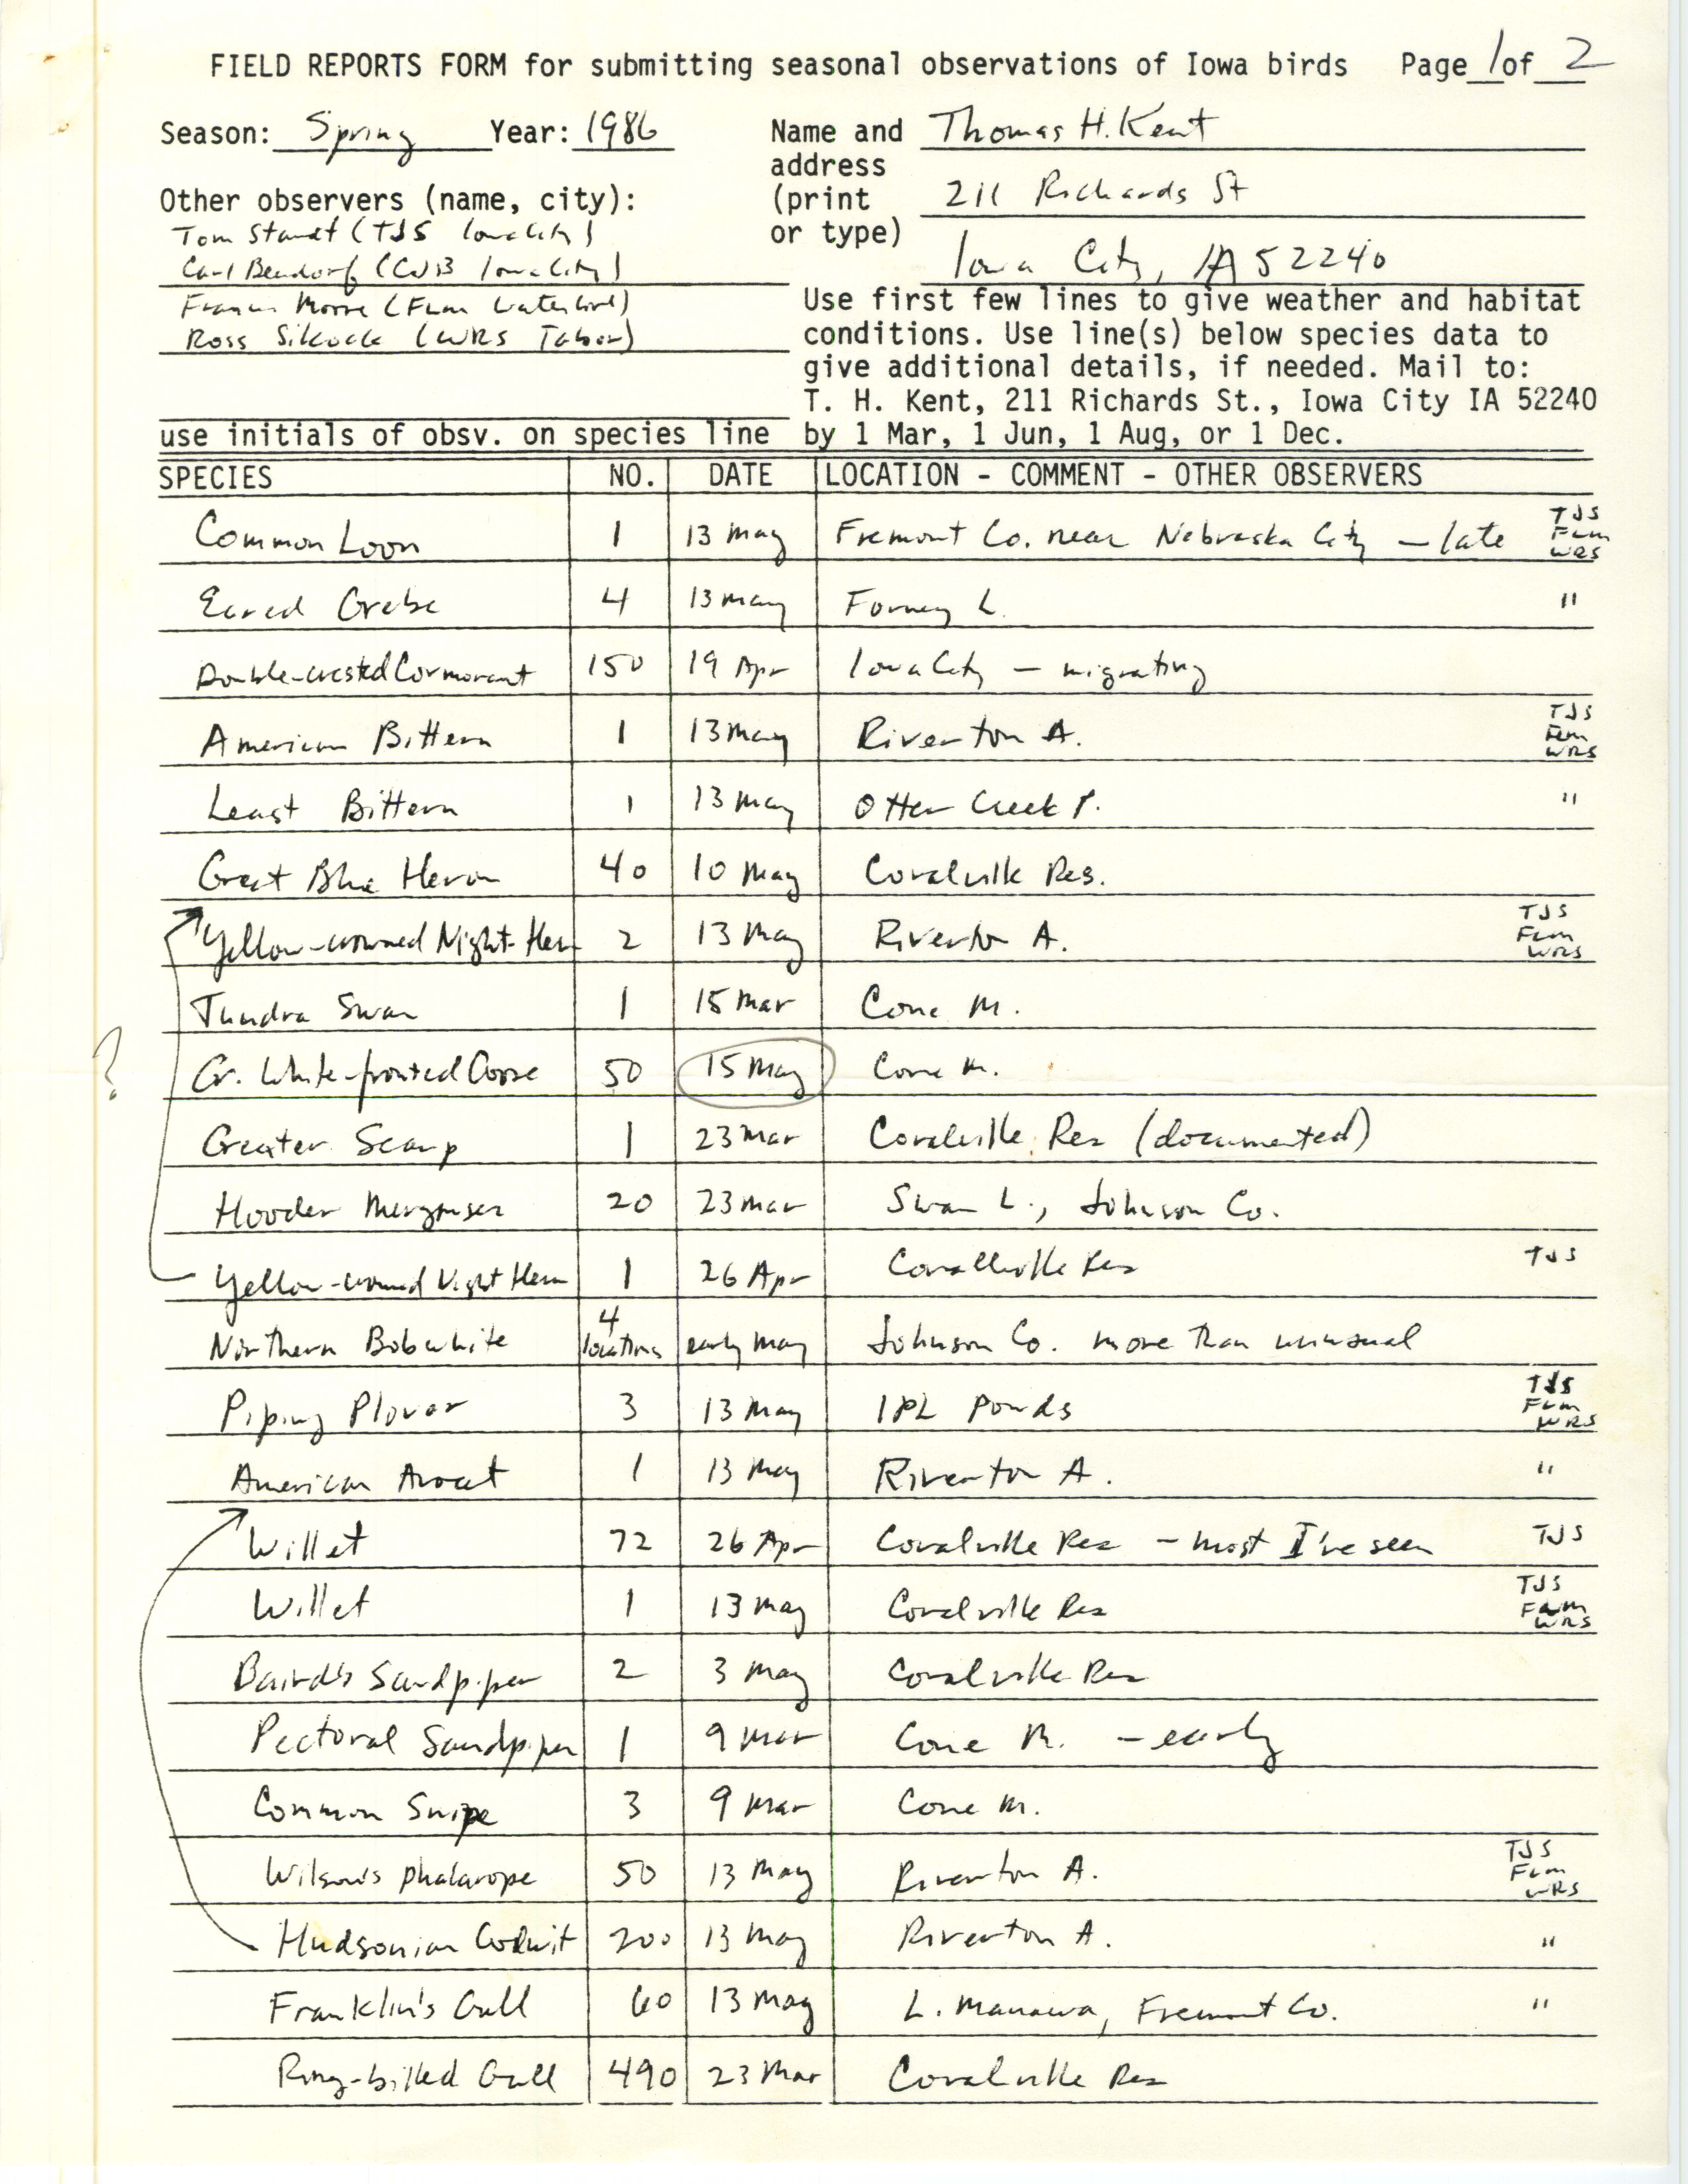 Field reports form for submitting seasonal observations of Iowa birds, Thomas Kent, Spring 1986